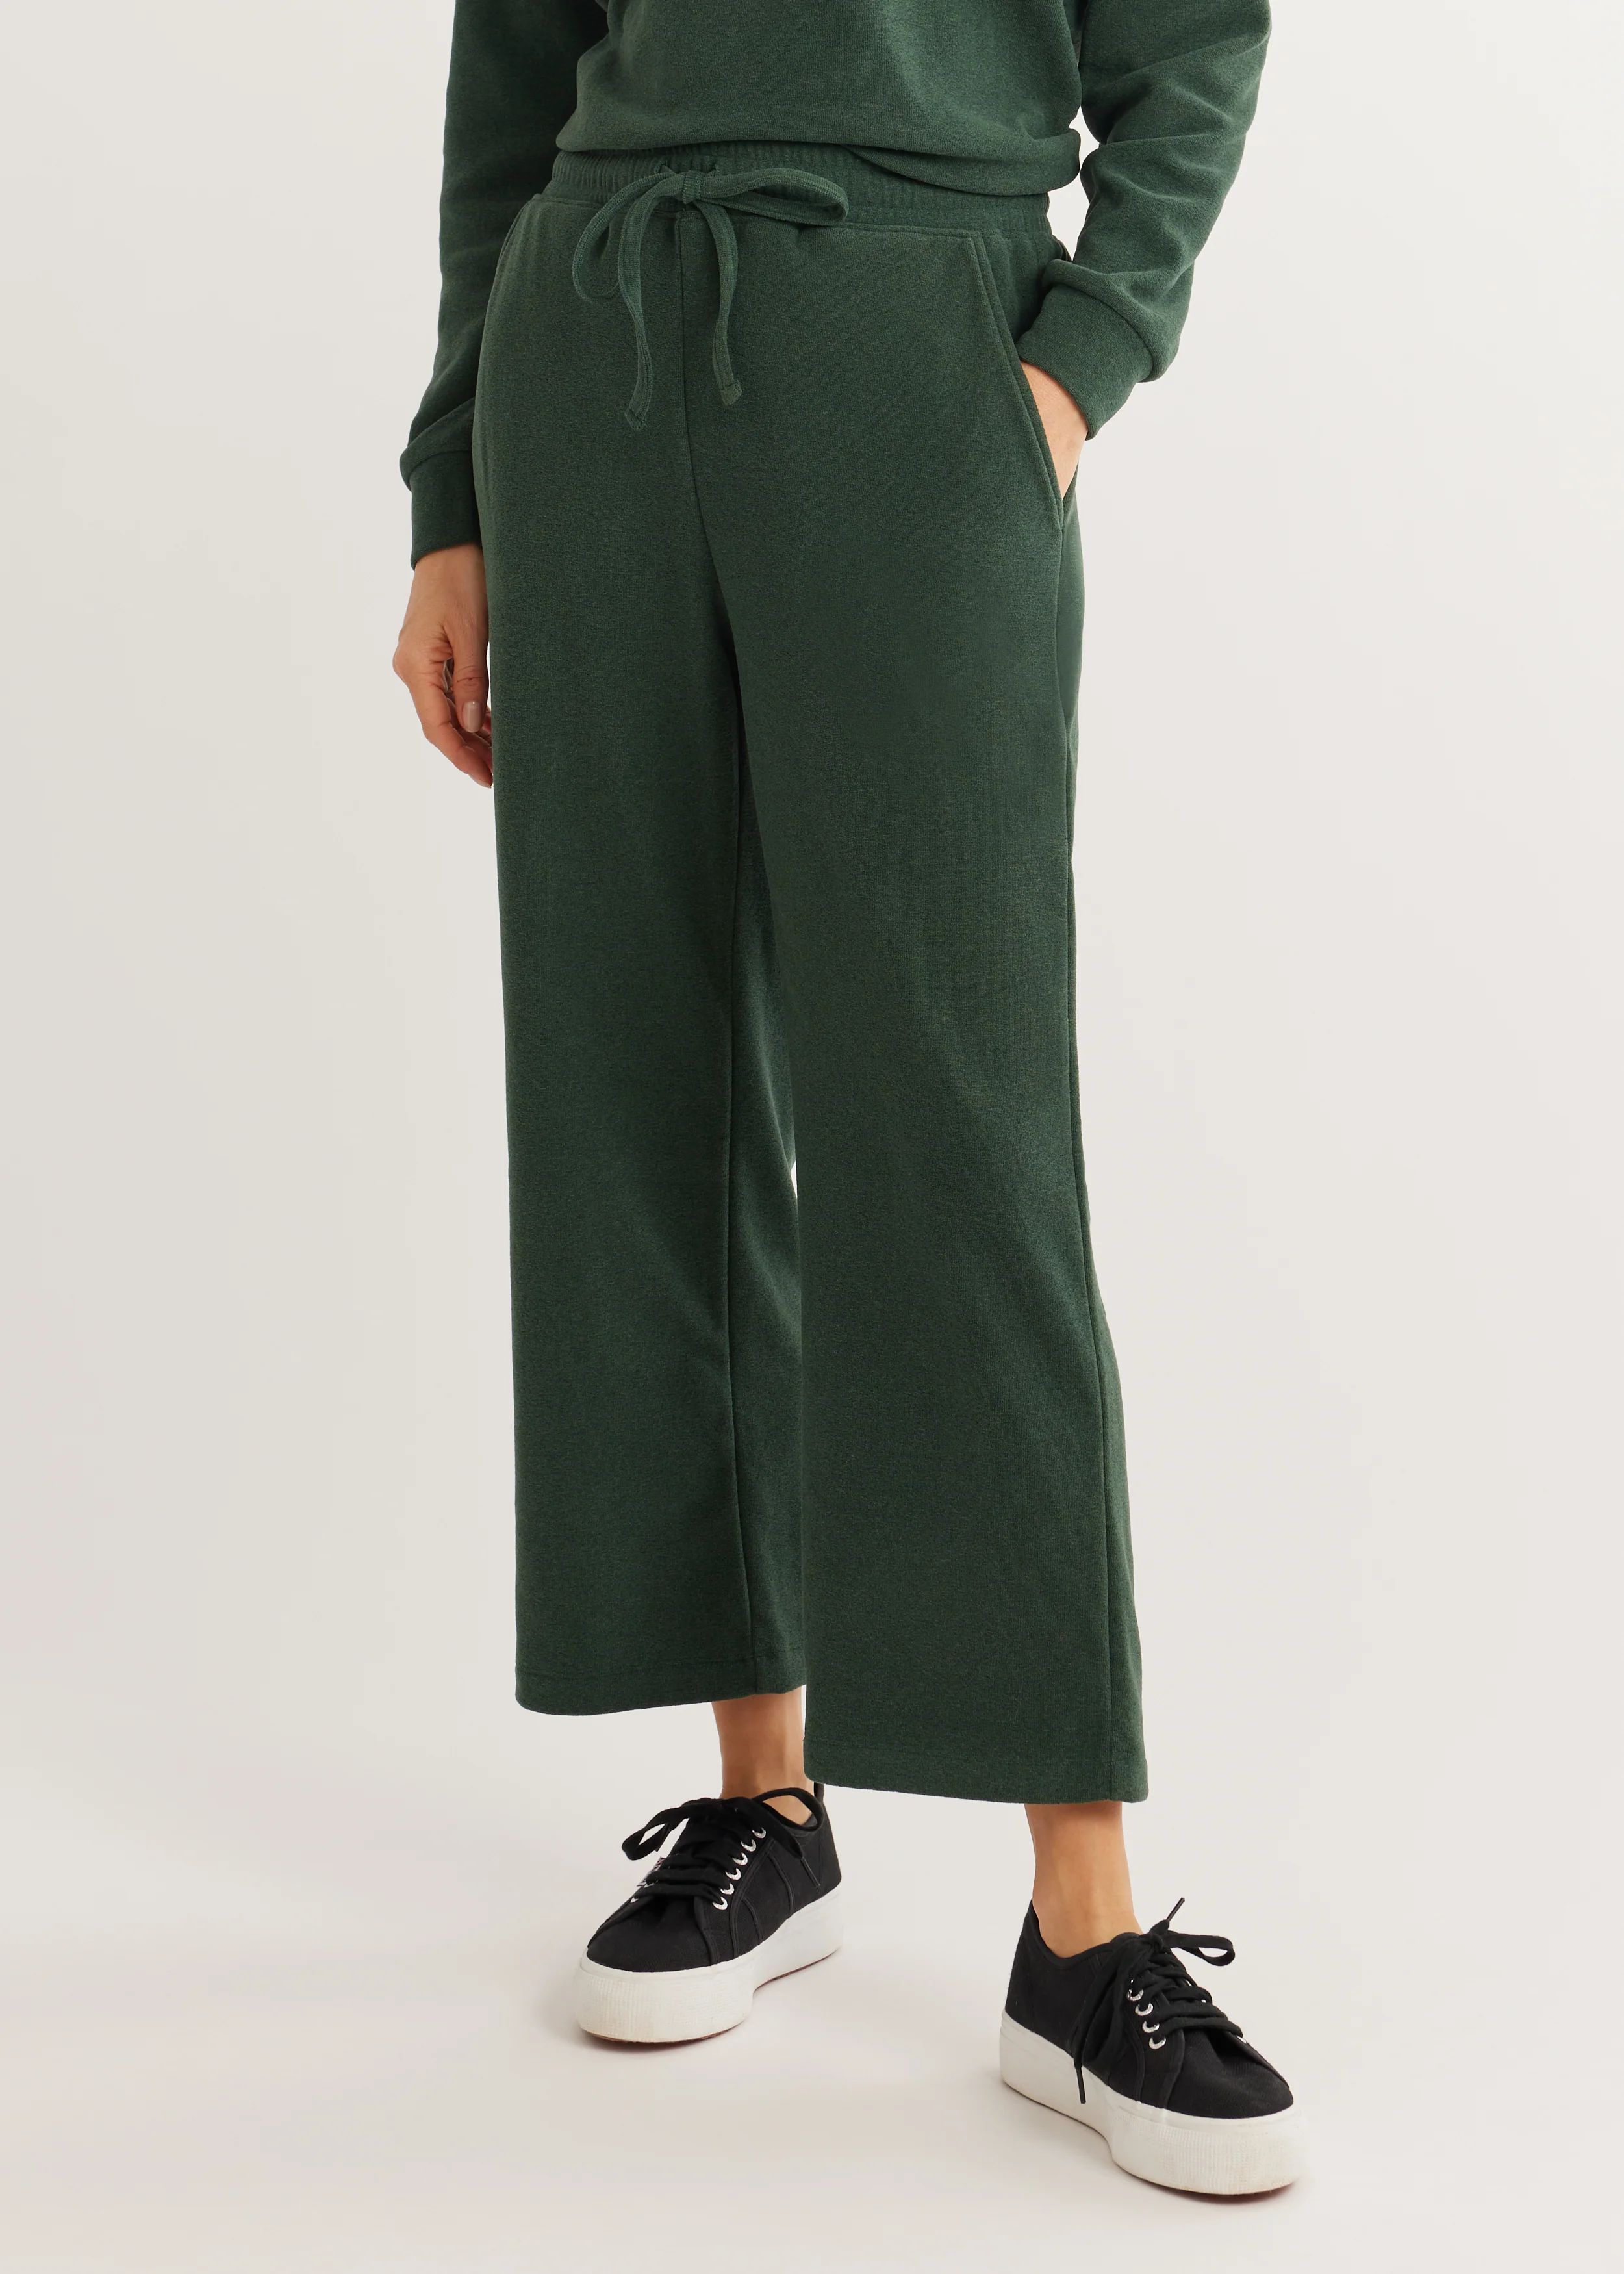 Chateau Lounge Pant in Terry Fleece (Hunter Green) | Dudley Stephens